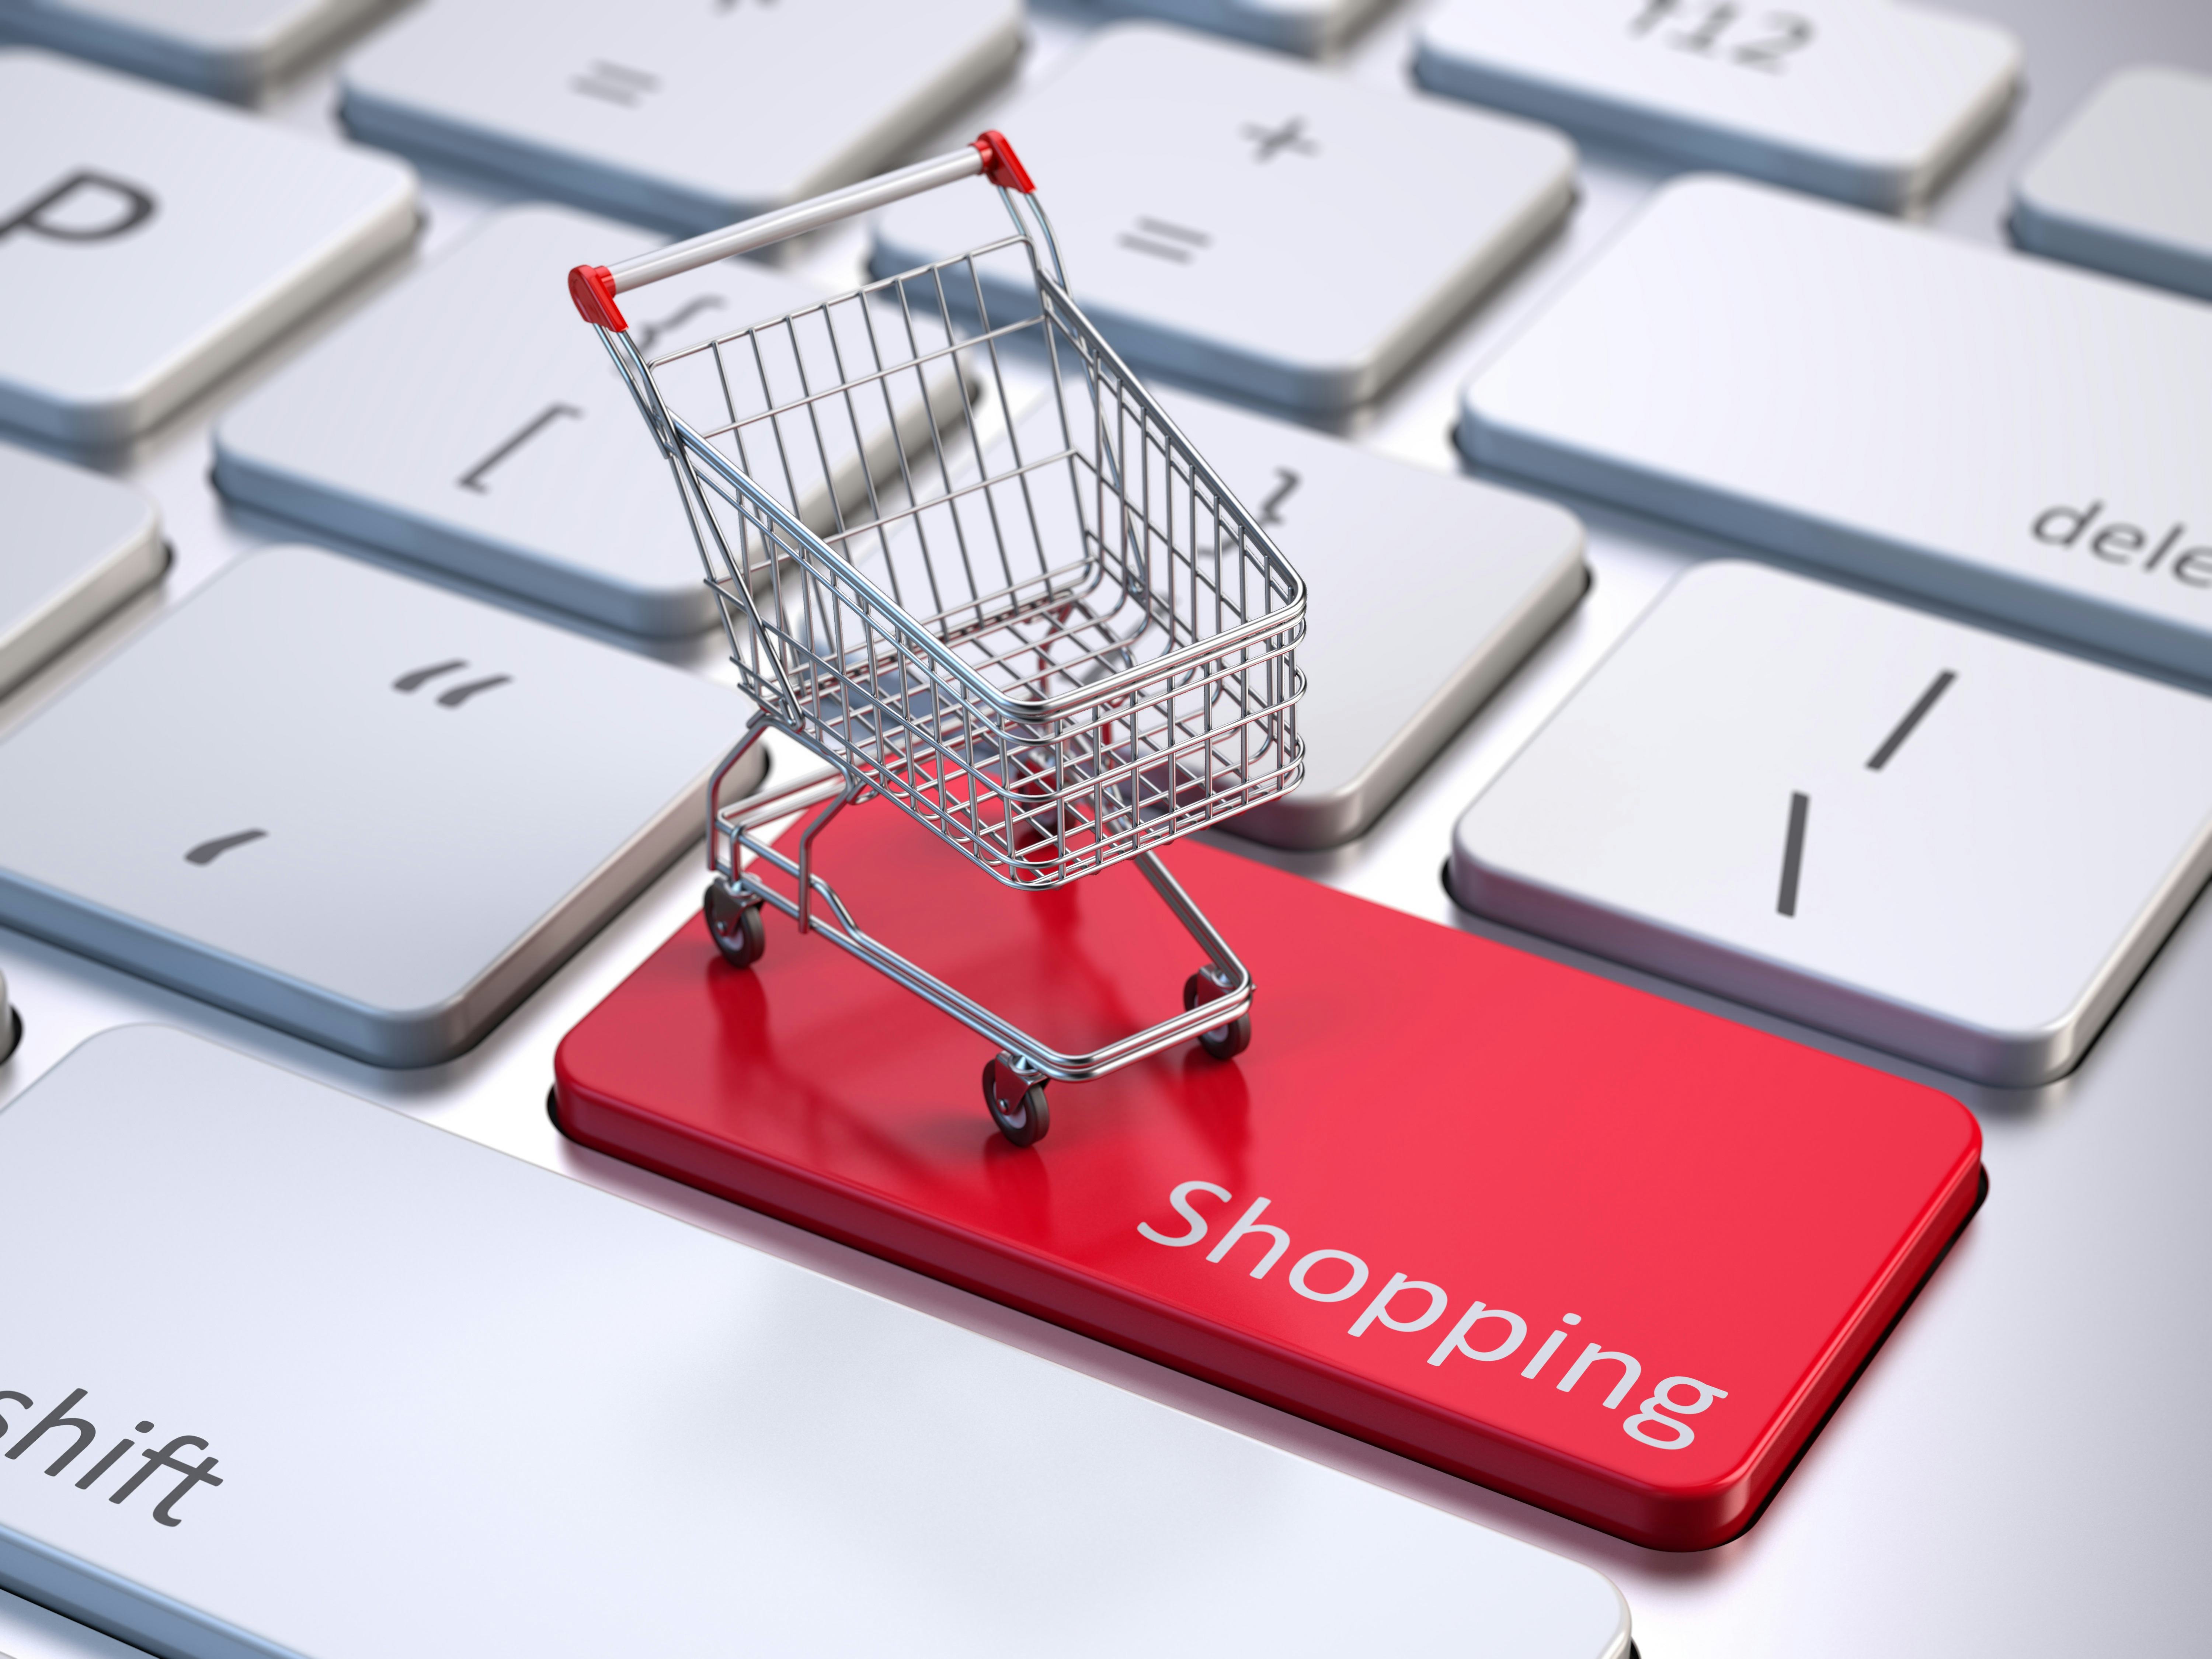 Webshops, in particular the ones operated by small to medium-sized businesses, increasingly resort to online platforms. – Photo Shutterstock 